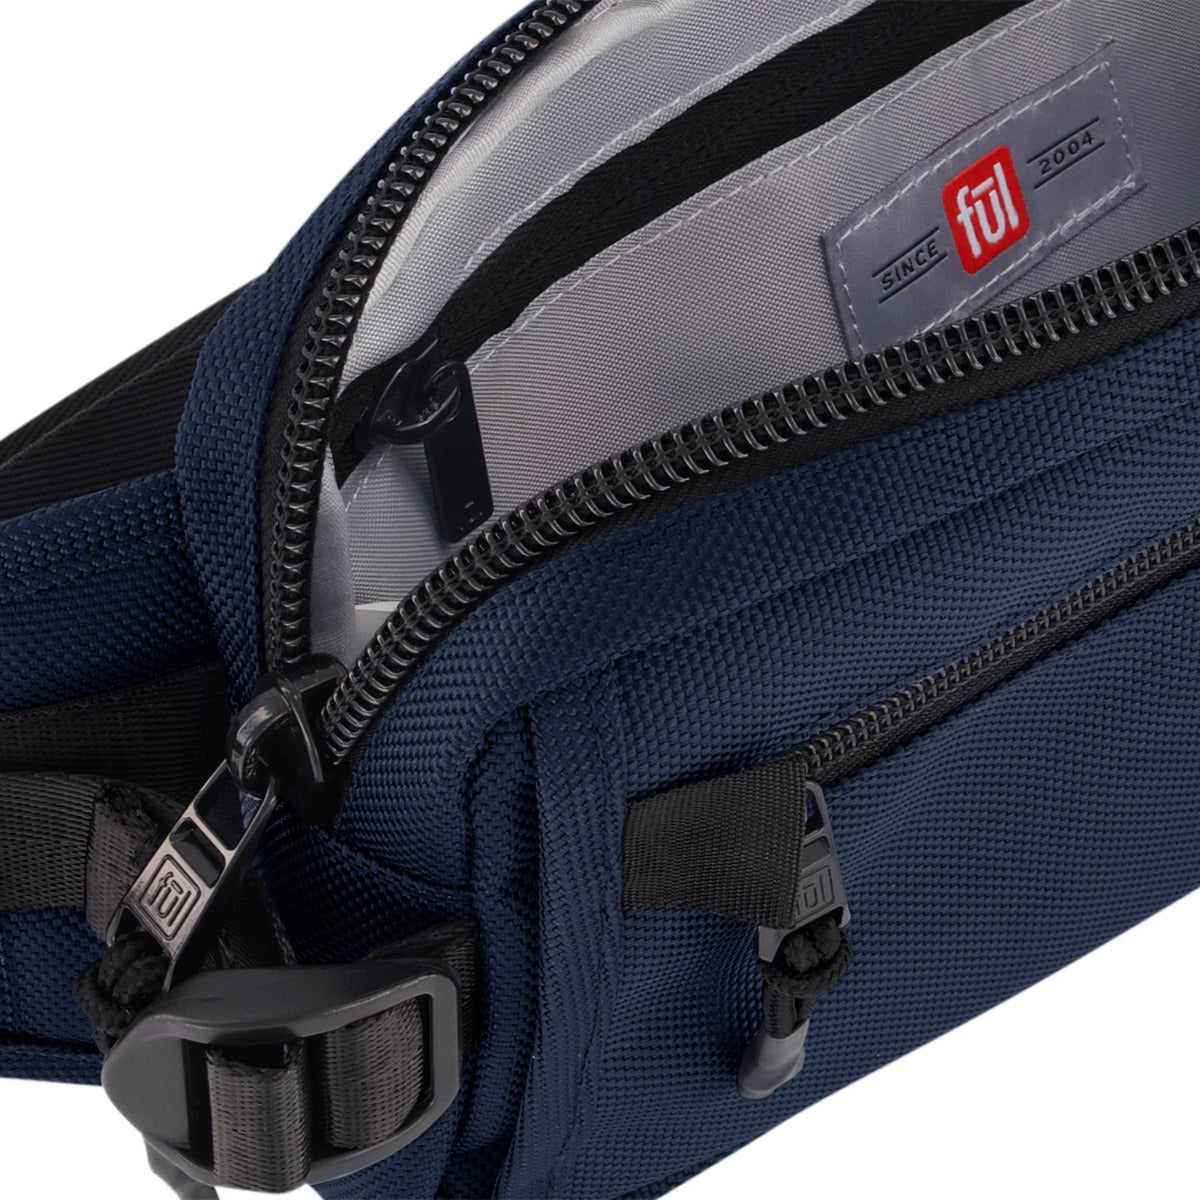 Ful tactics collection scout waistpack navy blue - best fanny packs for travelling